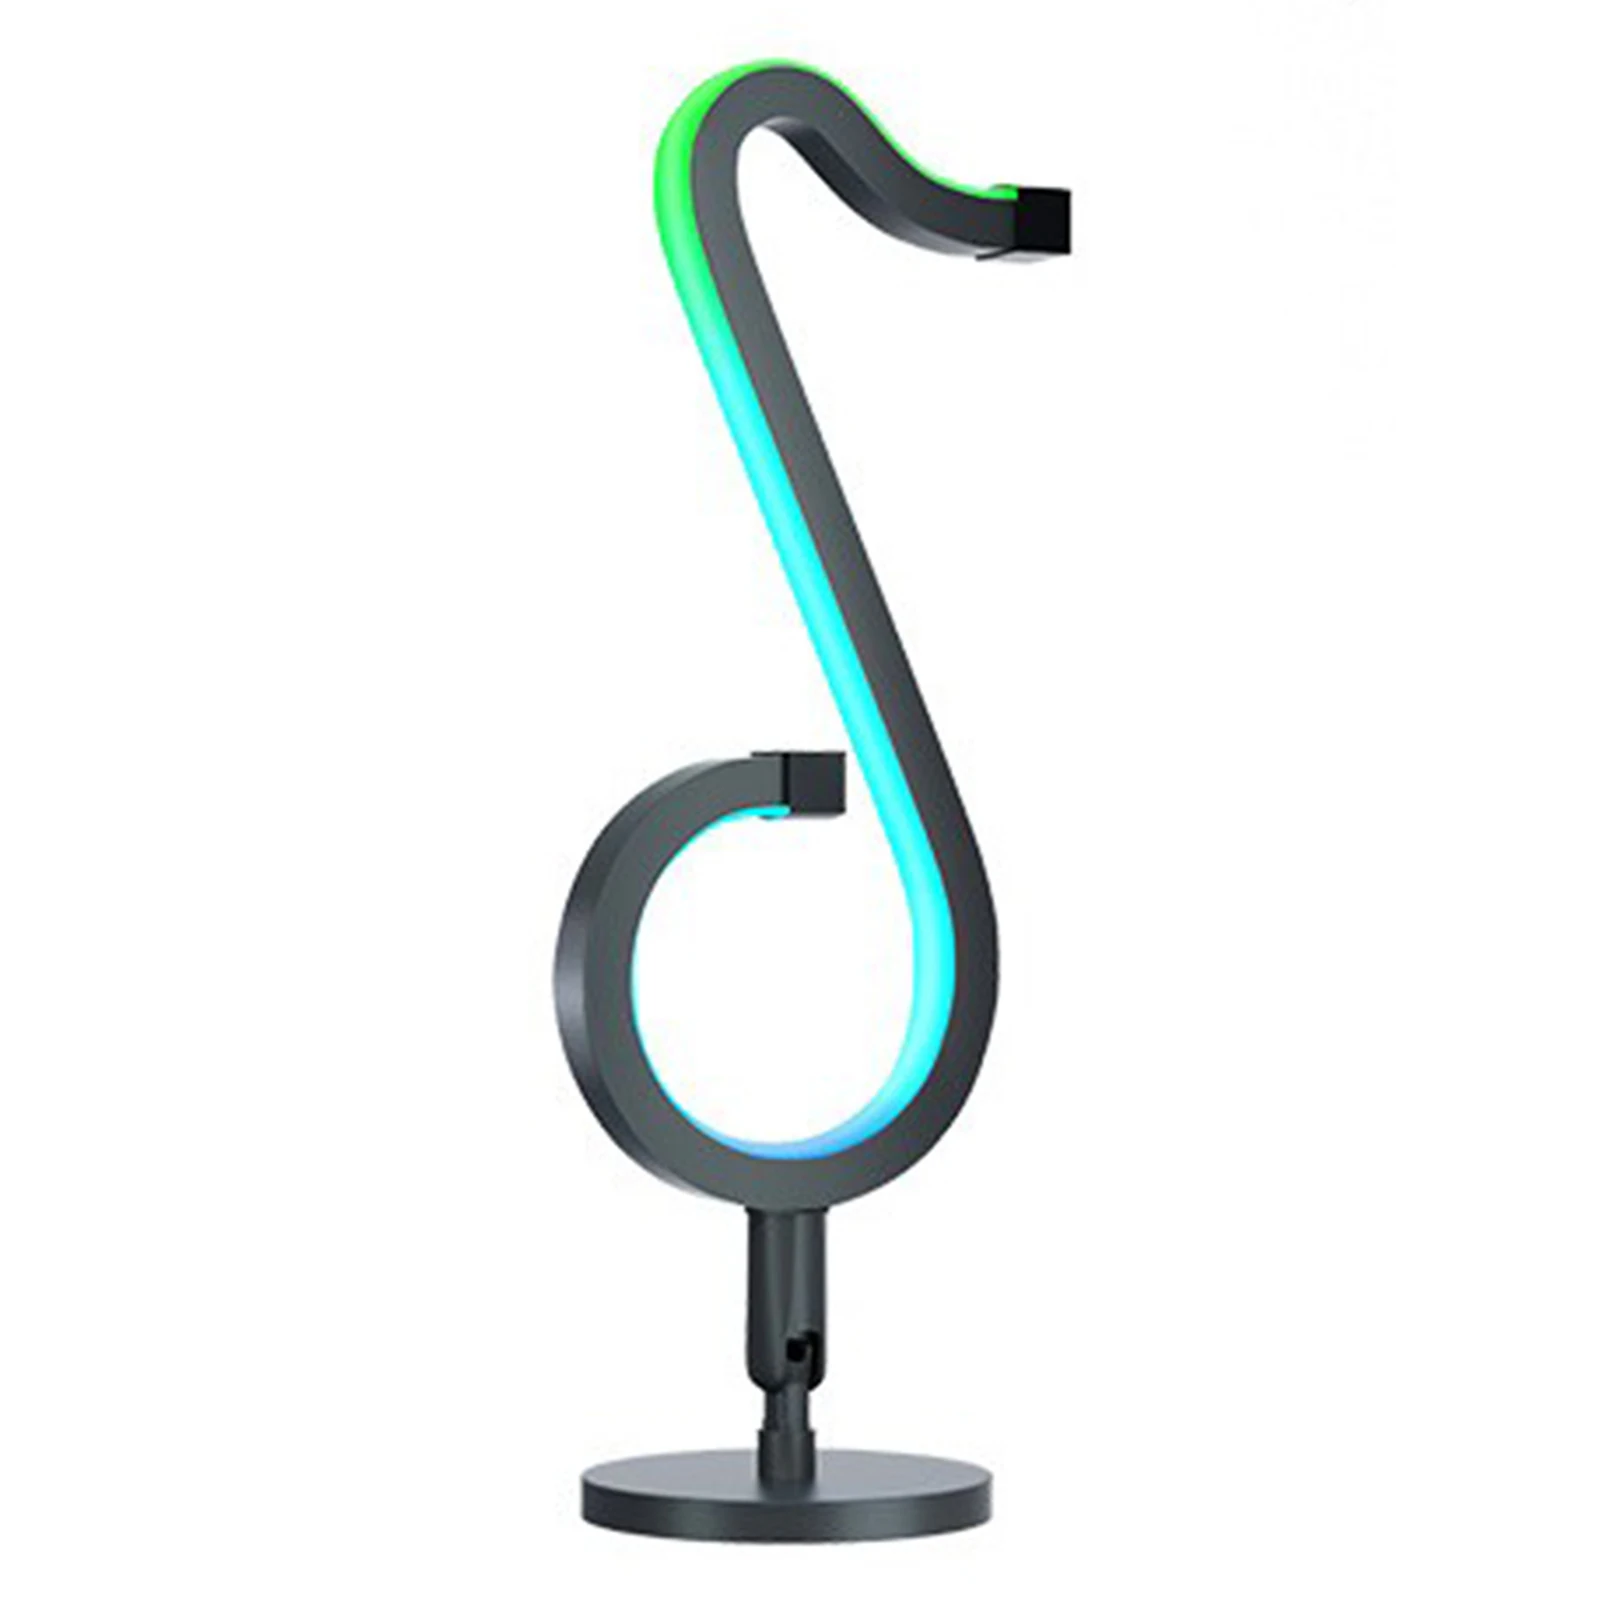 

Musical Note Lamp Nightstand Light 20W Indoor Colorful Cool Lamp Aisle Lighting Decor Remote Control Dimmable Atmosphere Lights